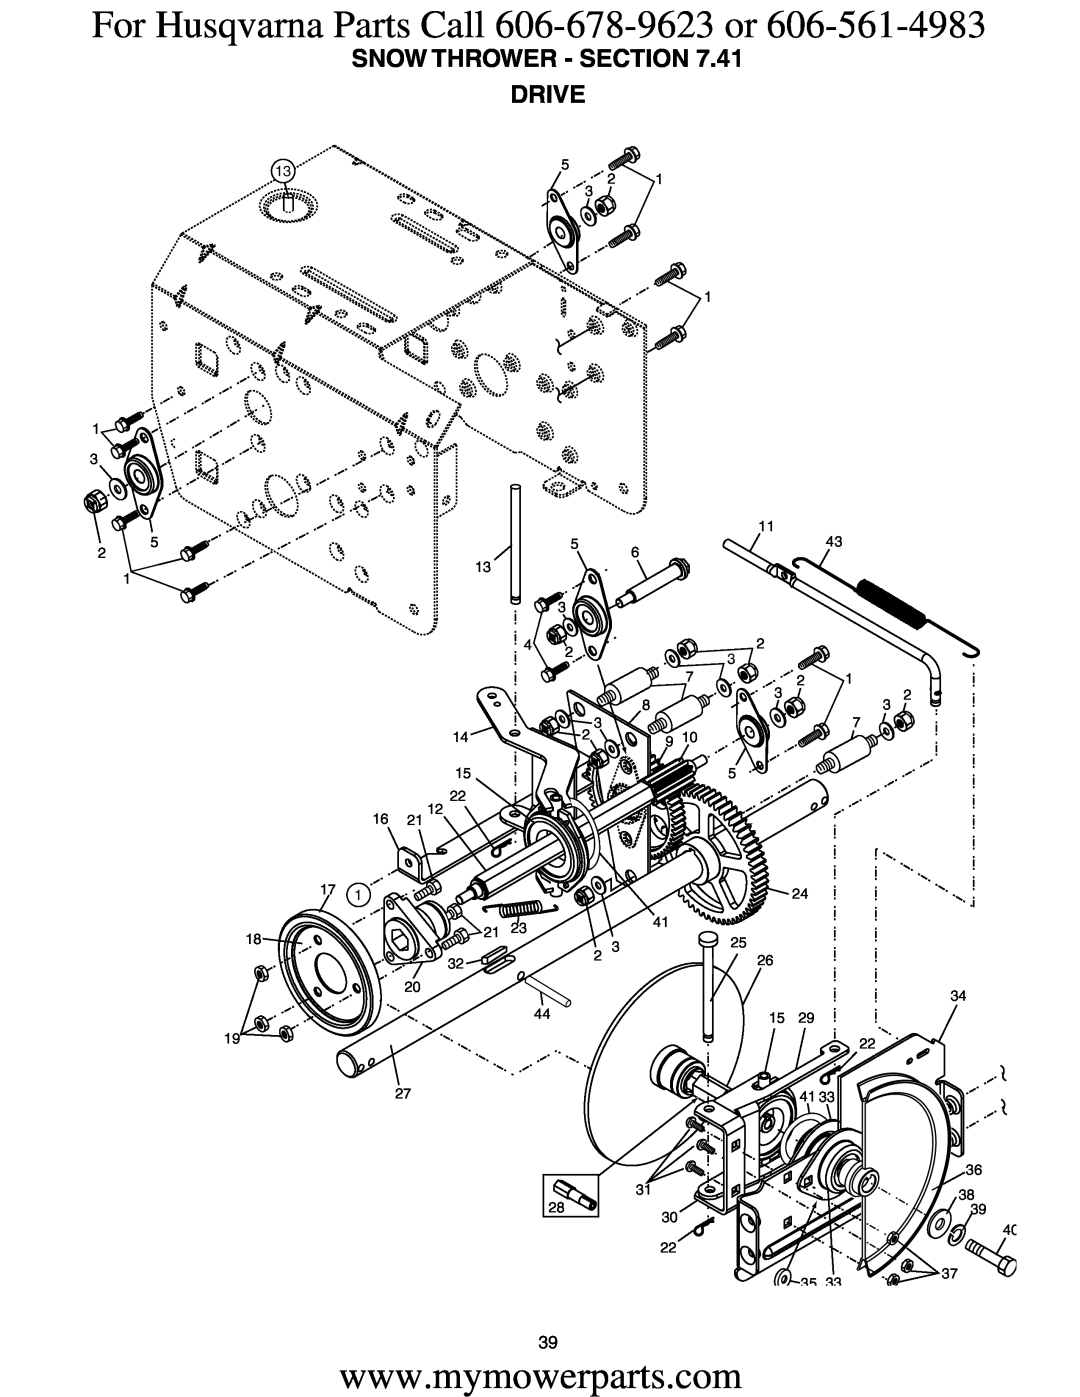 Electrolux OHV service manual For Husqvarna Parts Call 606-678-9623 or, Snow Thrower - Section Drive 